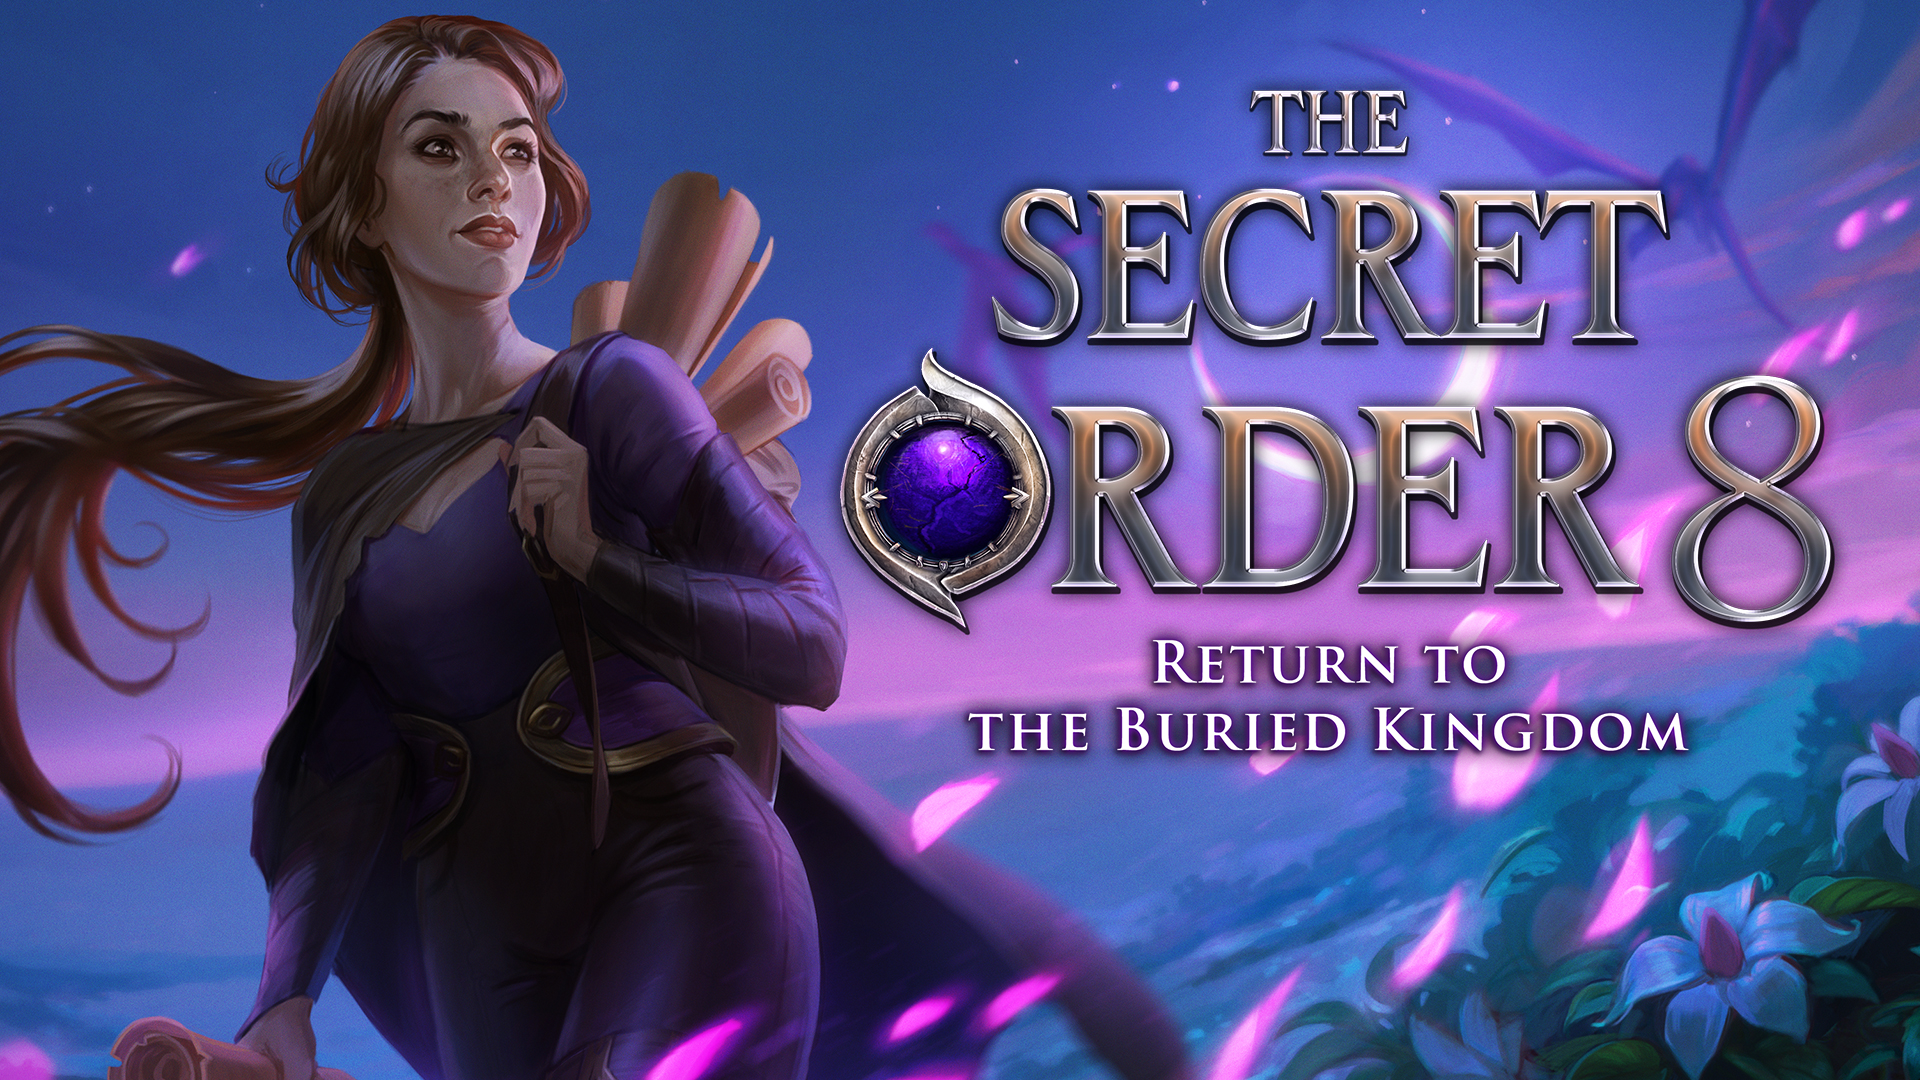 The Secret Order 8: Return to the Buried Kingdom instal the new